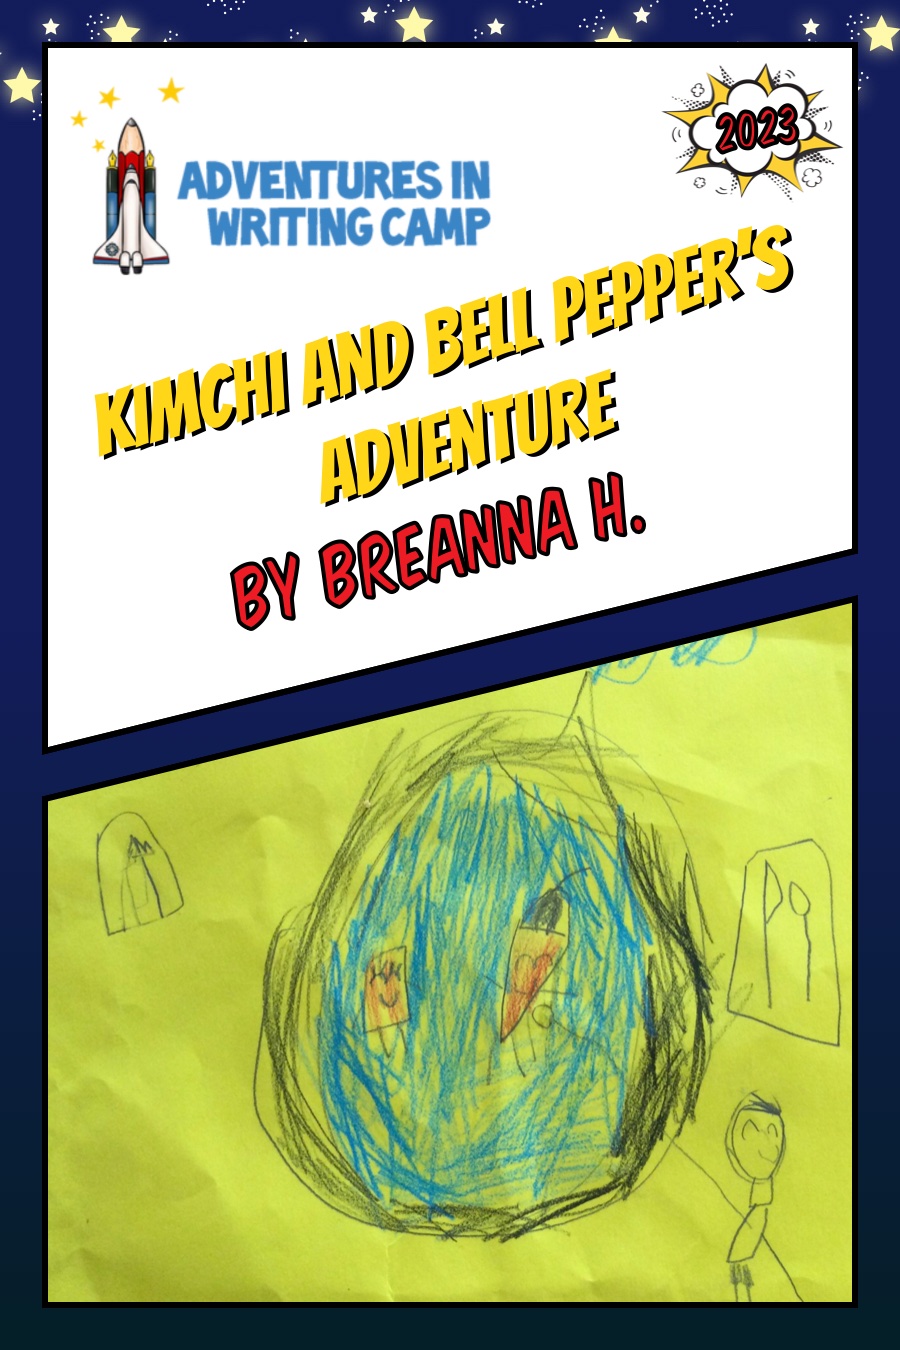 Kimchi and Bell Pepper’s Adventure by Breanna H